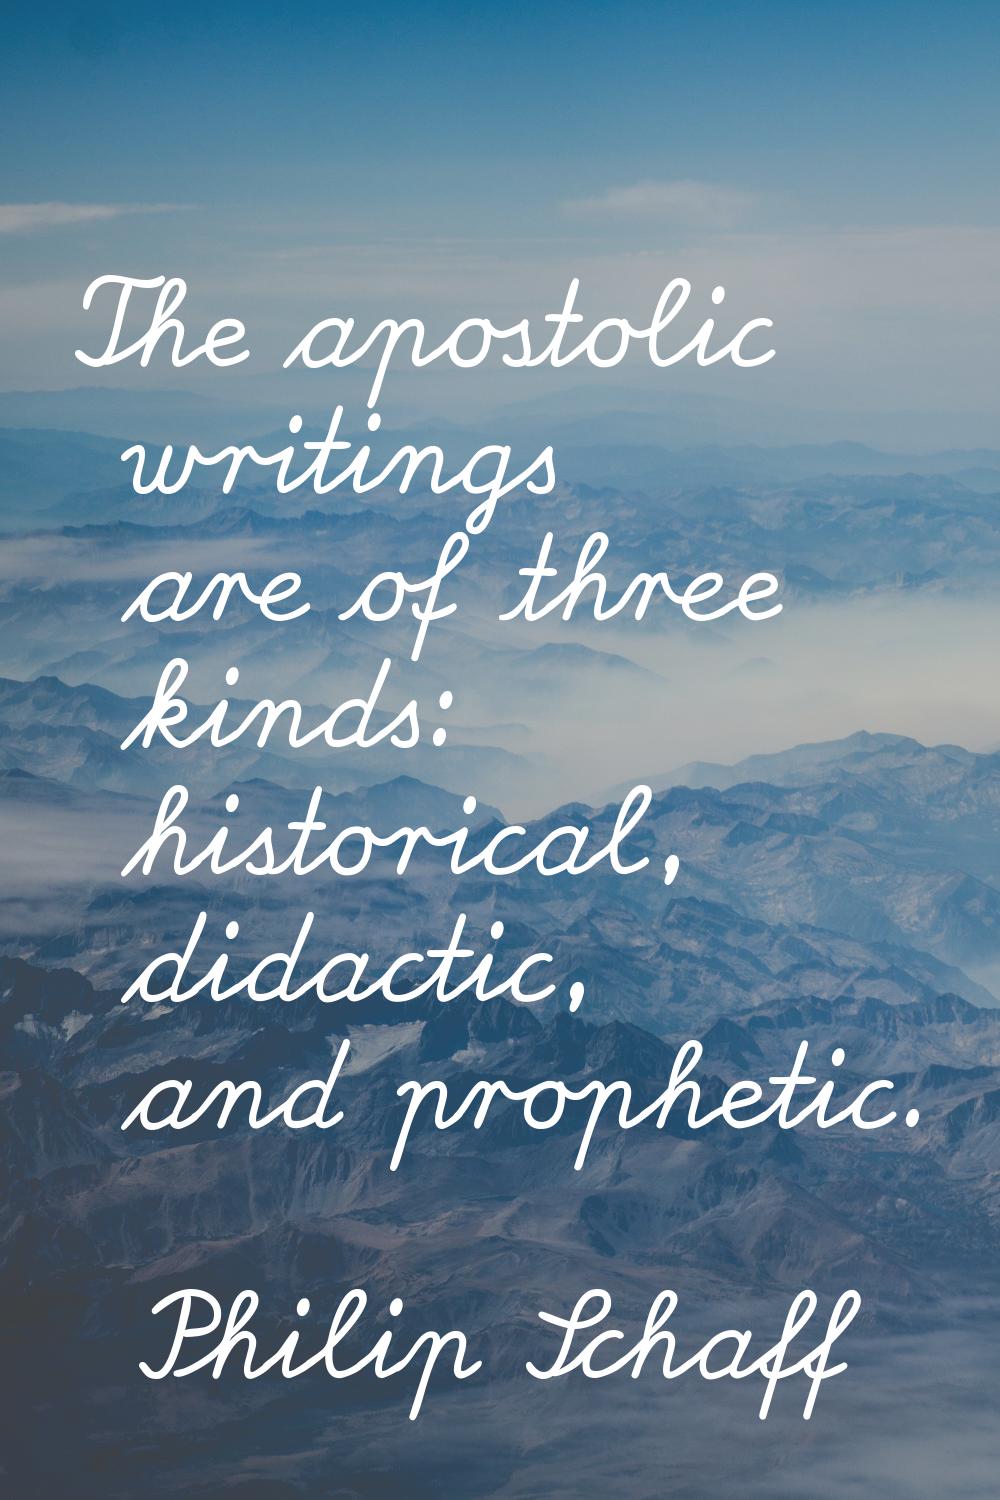 The apostolic writings are of three kinds: historical, didactic, and prophetic.